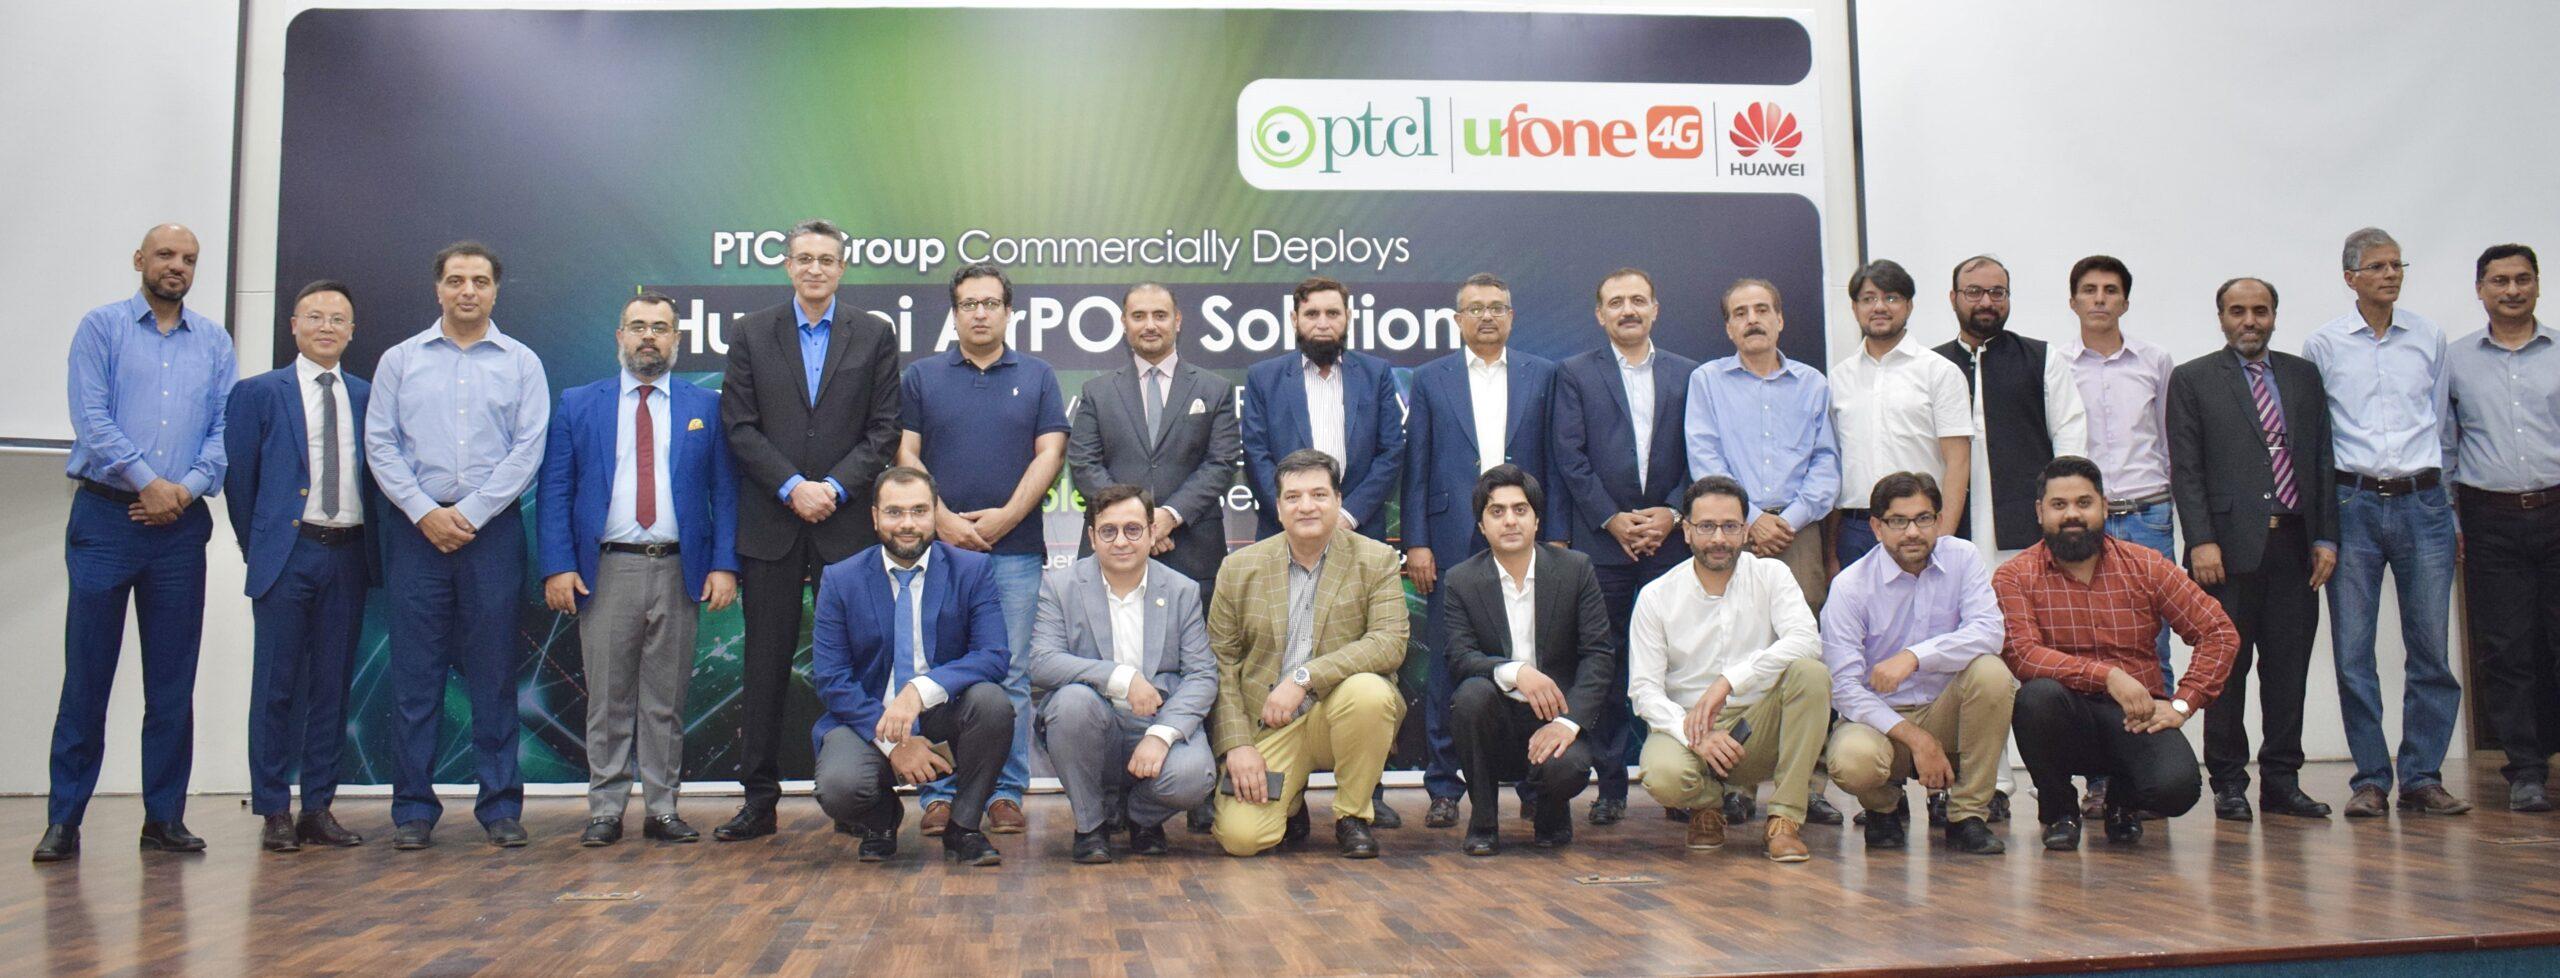 PTCL Huawei successfully deploys Air PON Solution